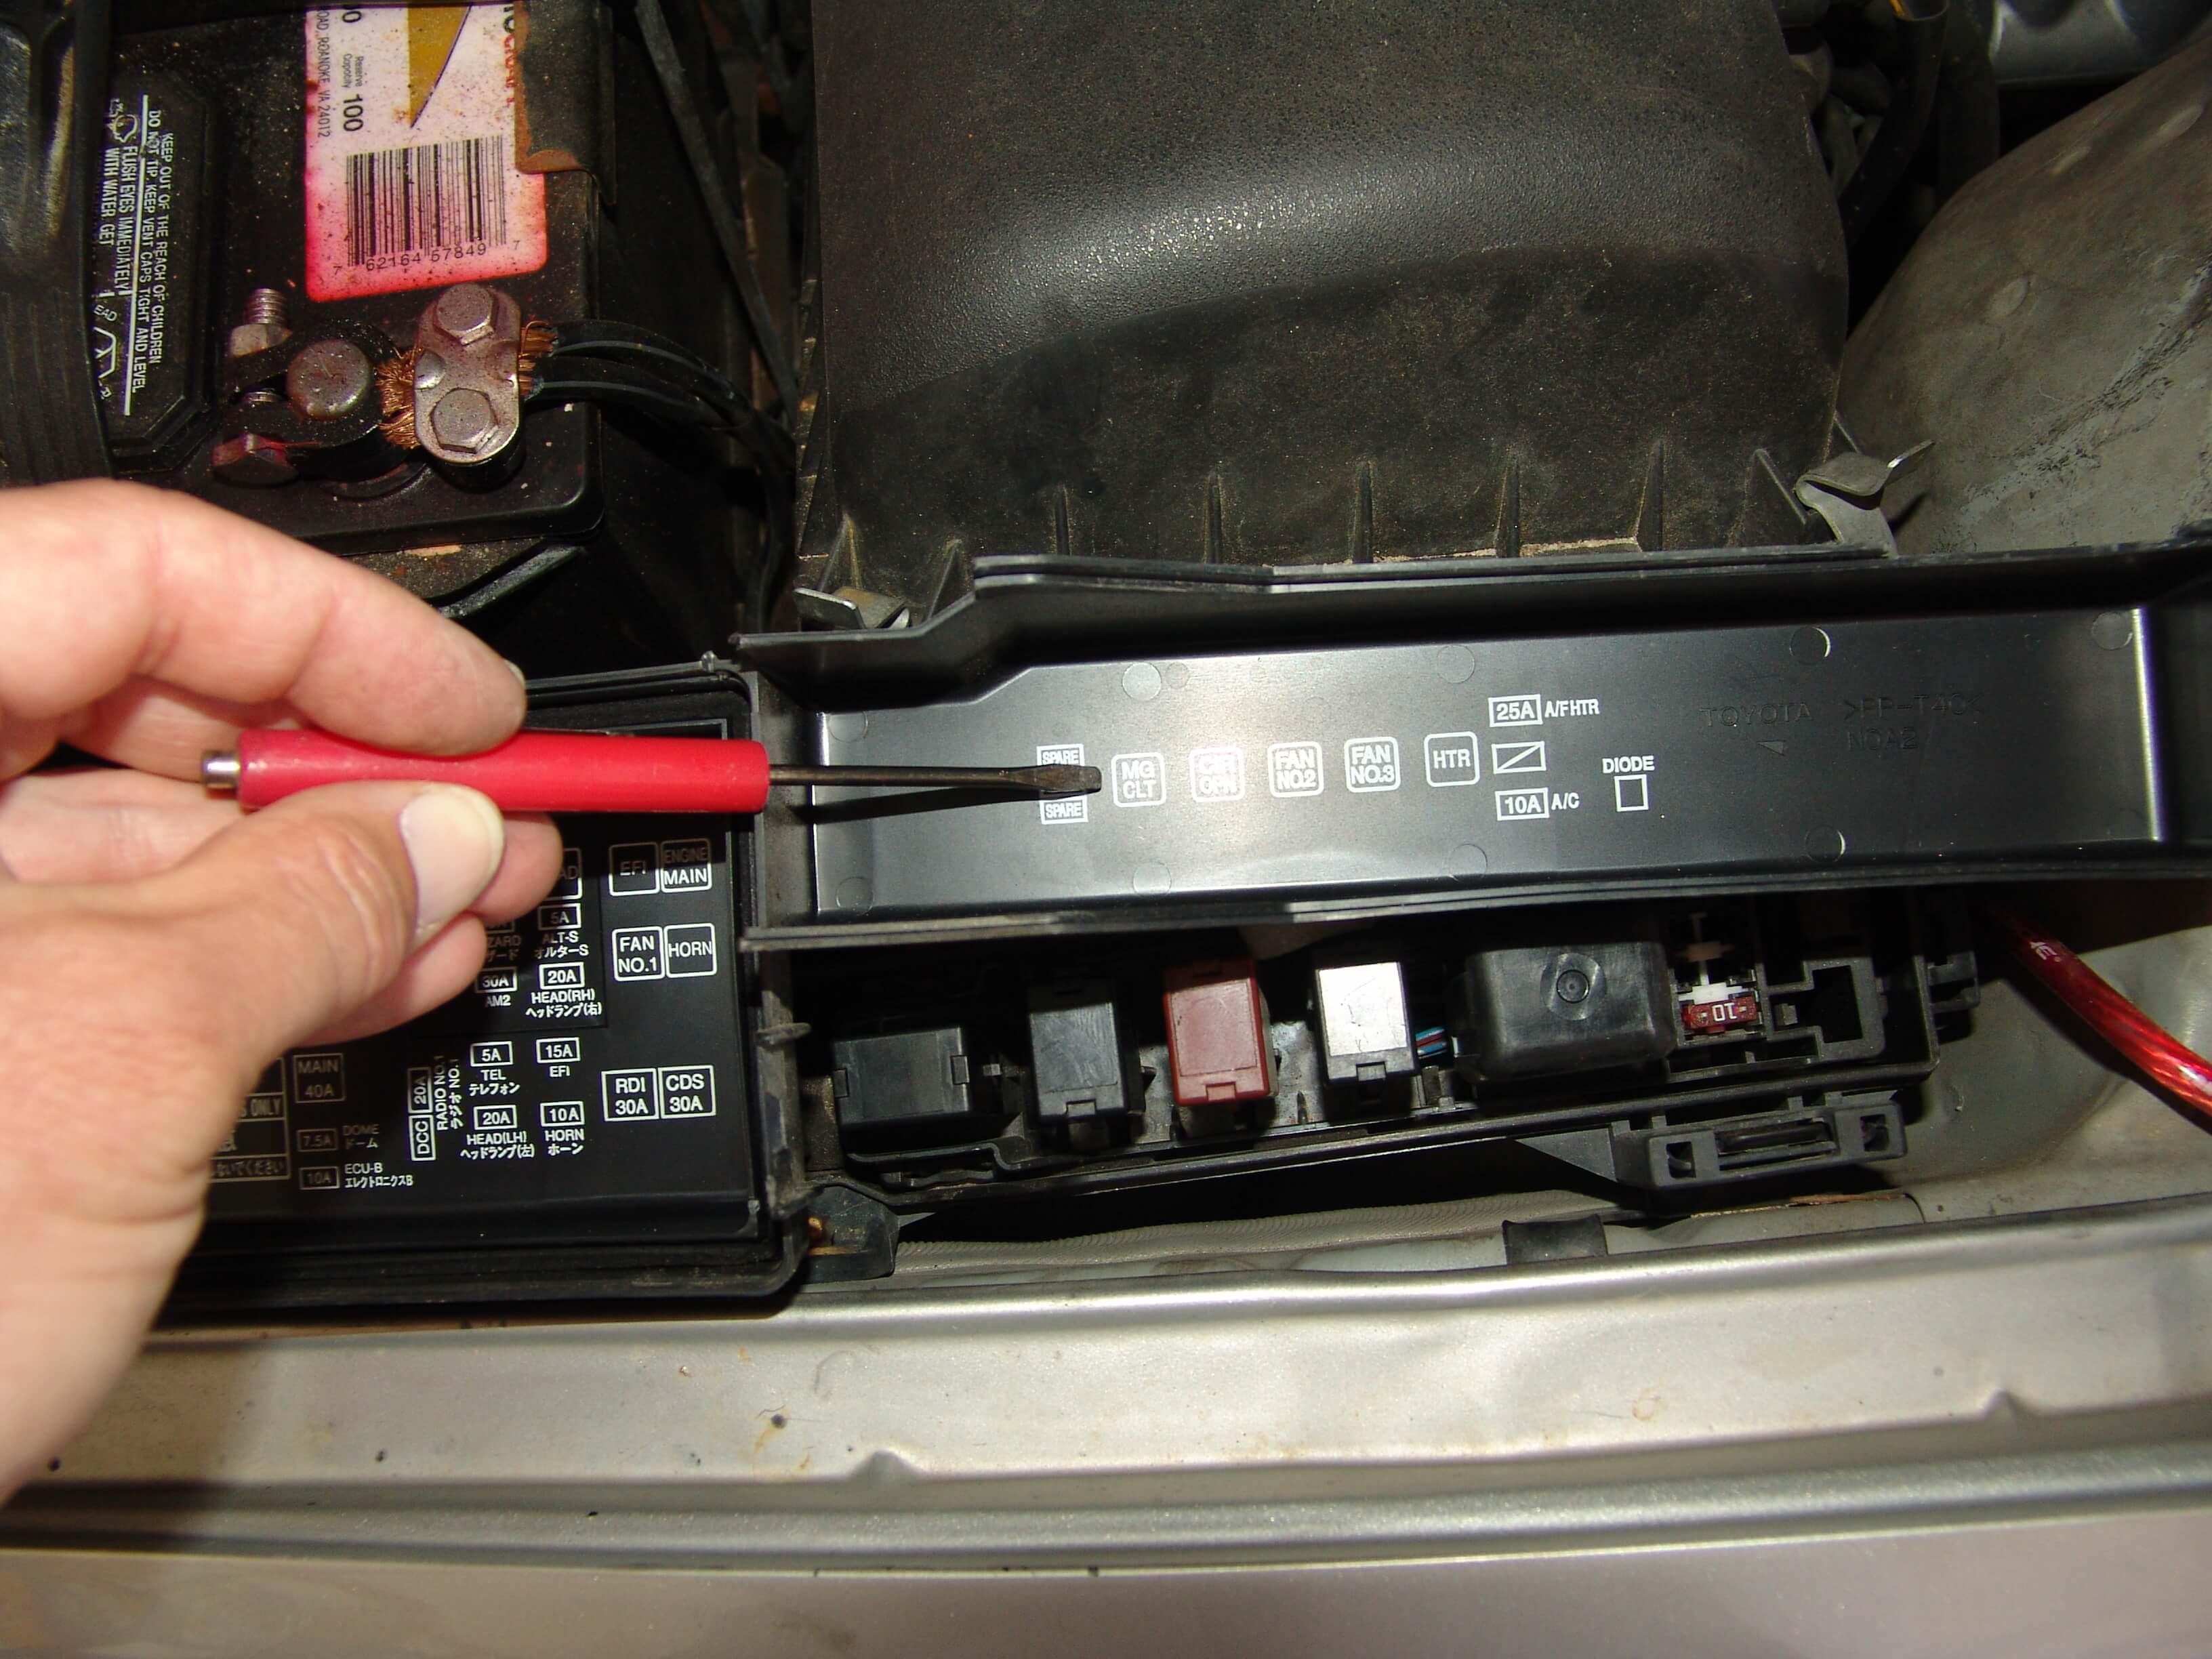 2000 Toyota Camry A/C Inop, A/C Light Flashes - Sparky's ... 2004 toyota solara fuse box diagram 